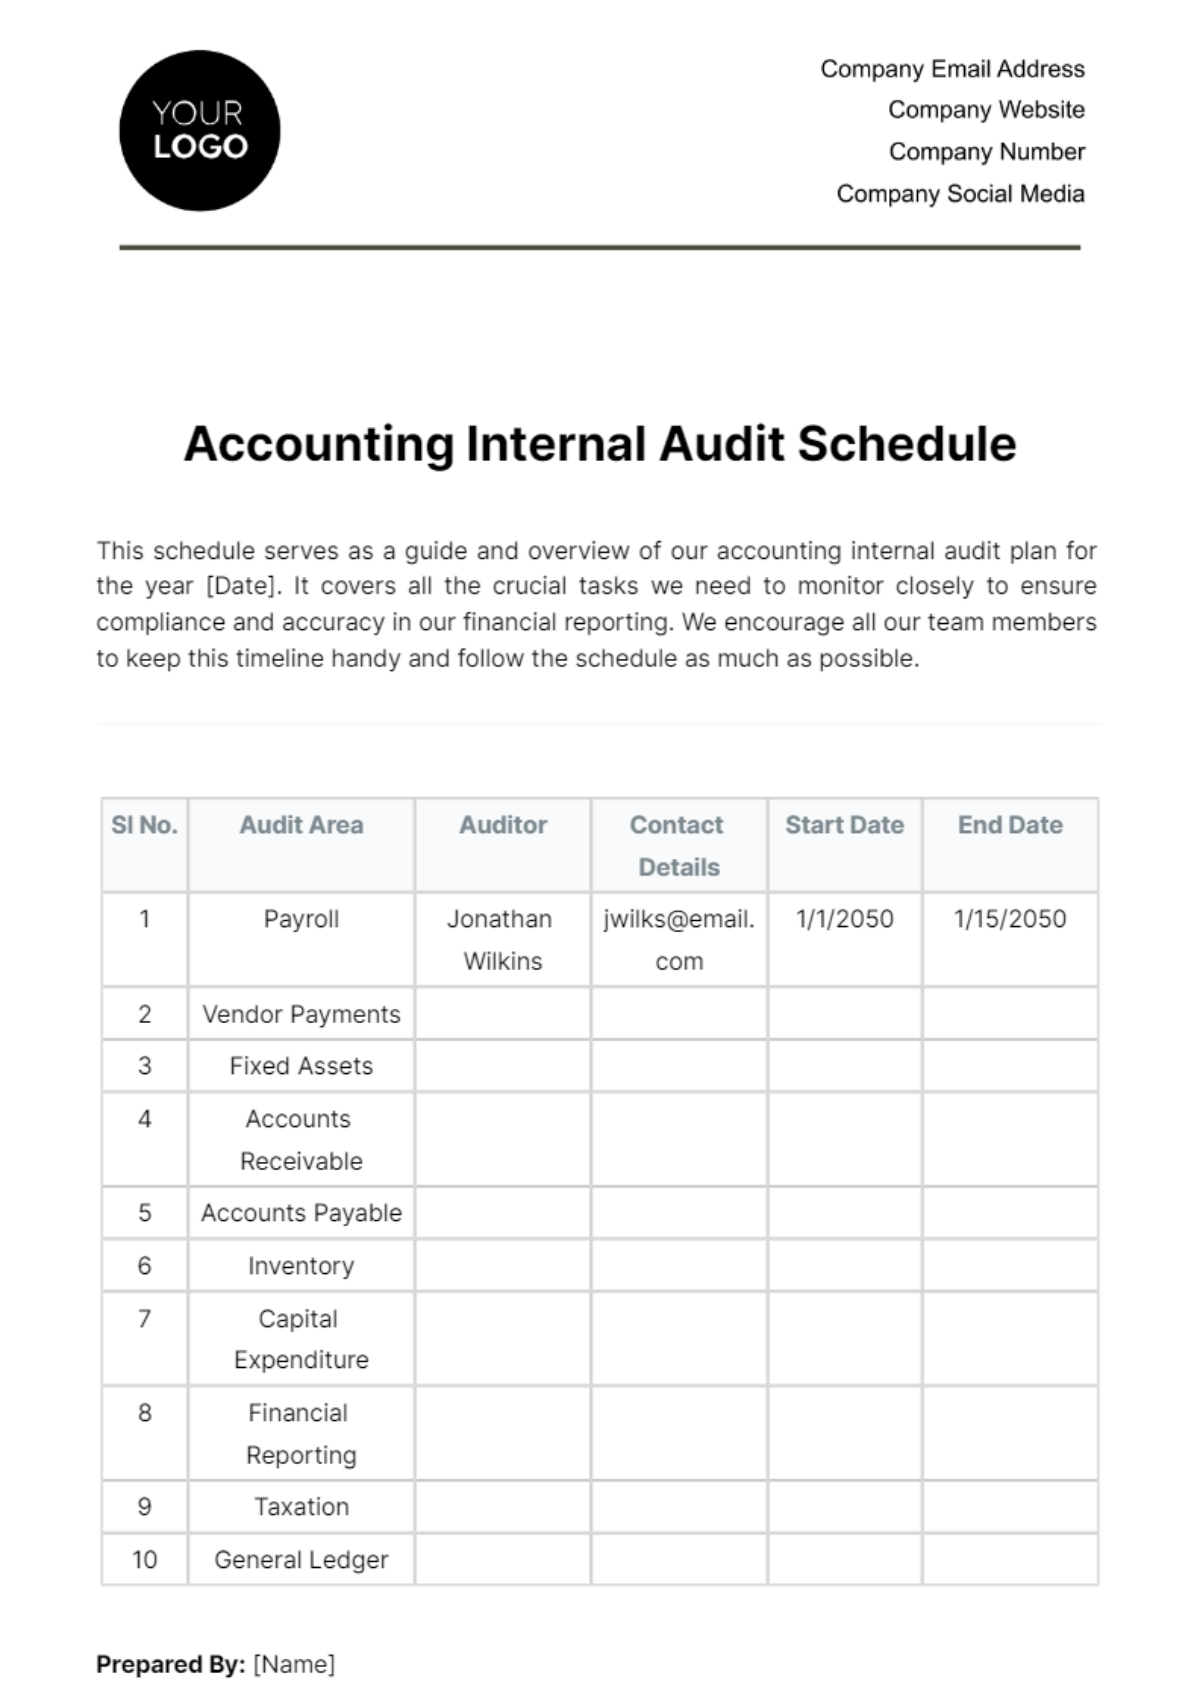 Free Accounting Internal Audit Schedule Template